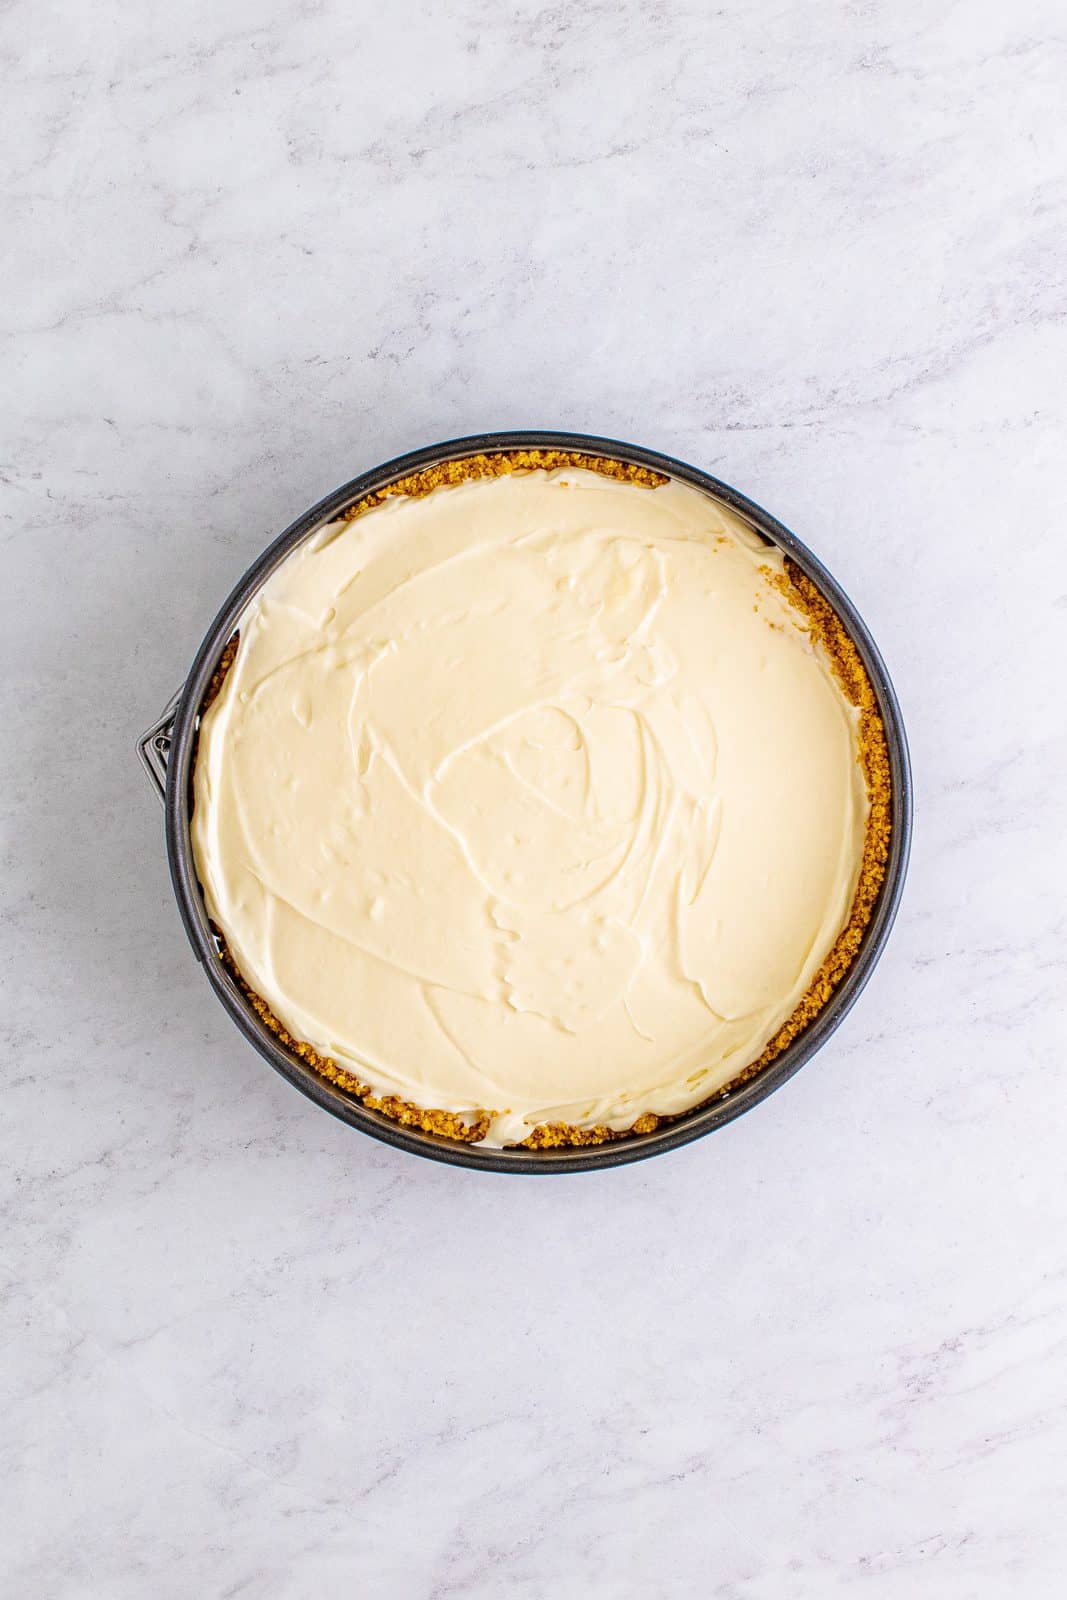 Cheesecake mixture spread into pan with crust.